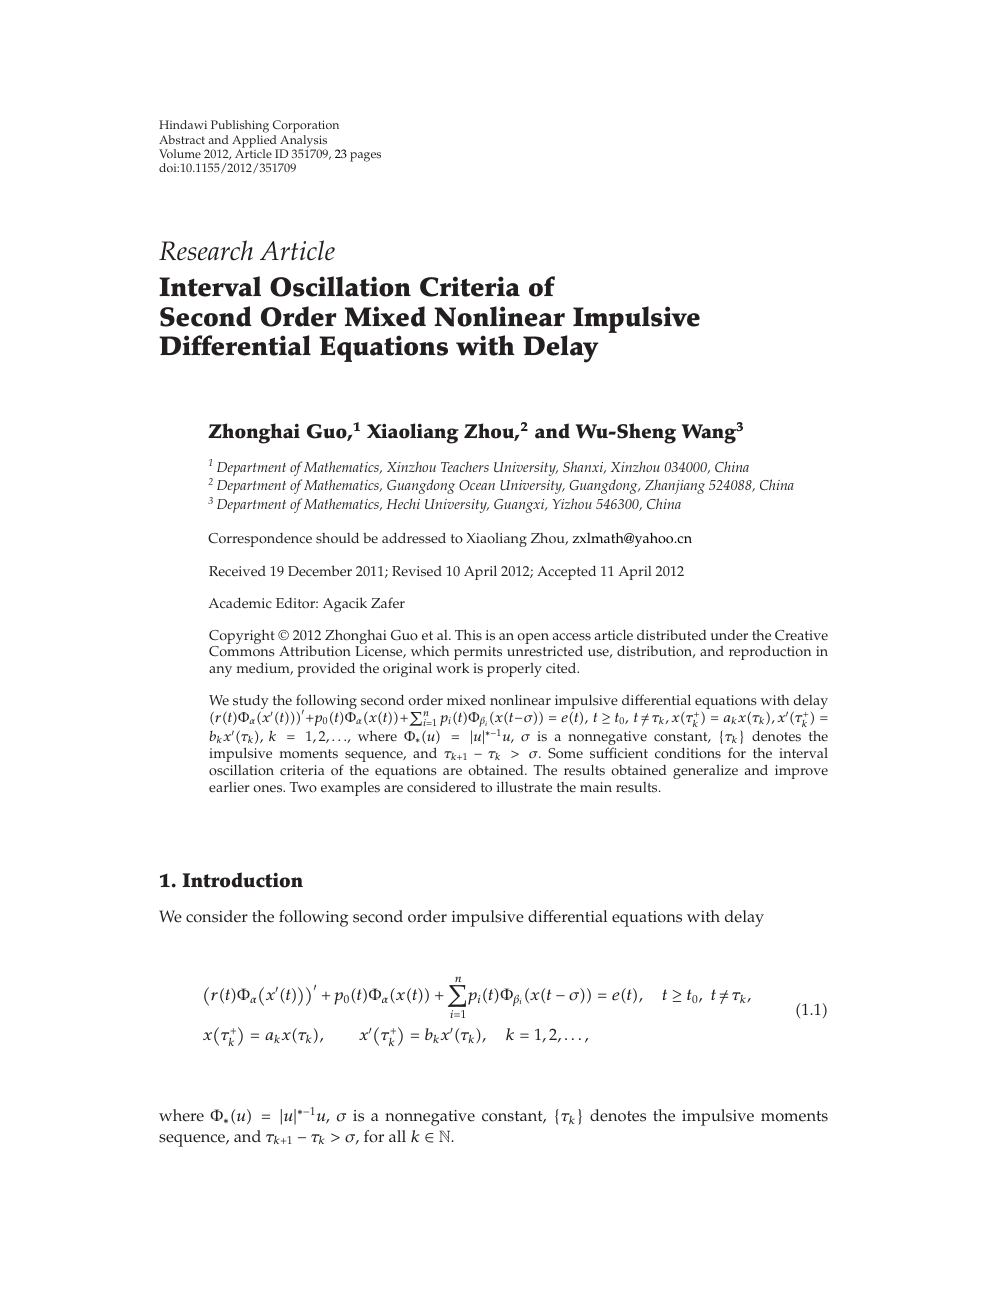 Interval Oscillation Criteria Of Second Order Mixed Nonlinear Impulsive Differential Equations With Delay Topic Of Research Paper In Mathematics Download Scholarly Article Pdf And Read For Free On Cyberleninka Open Science